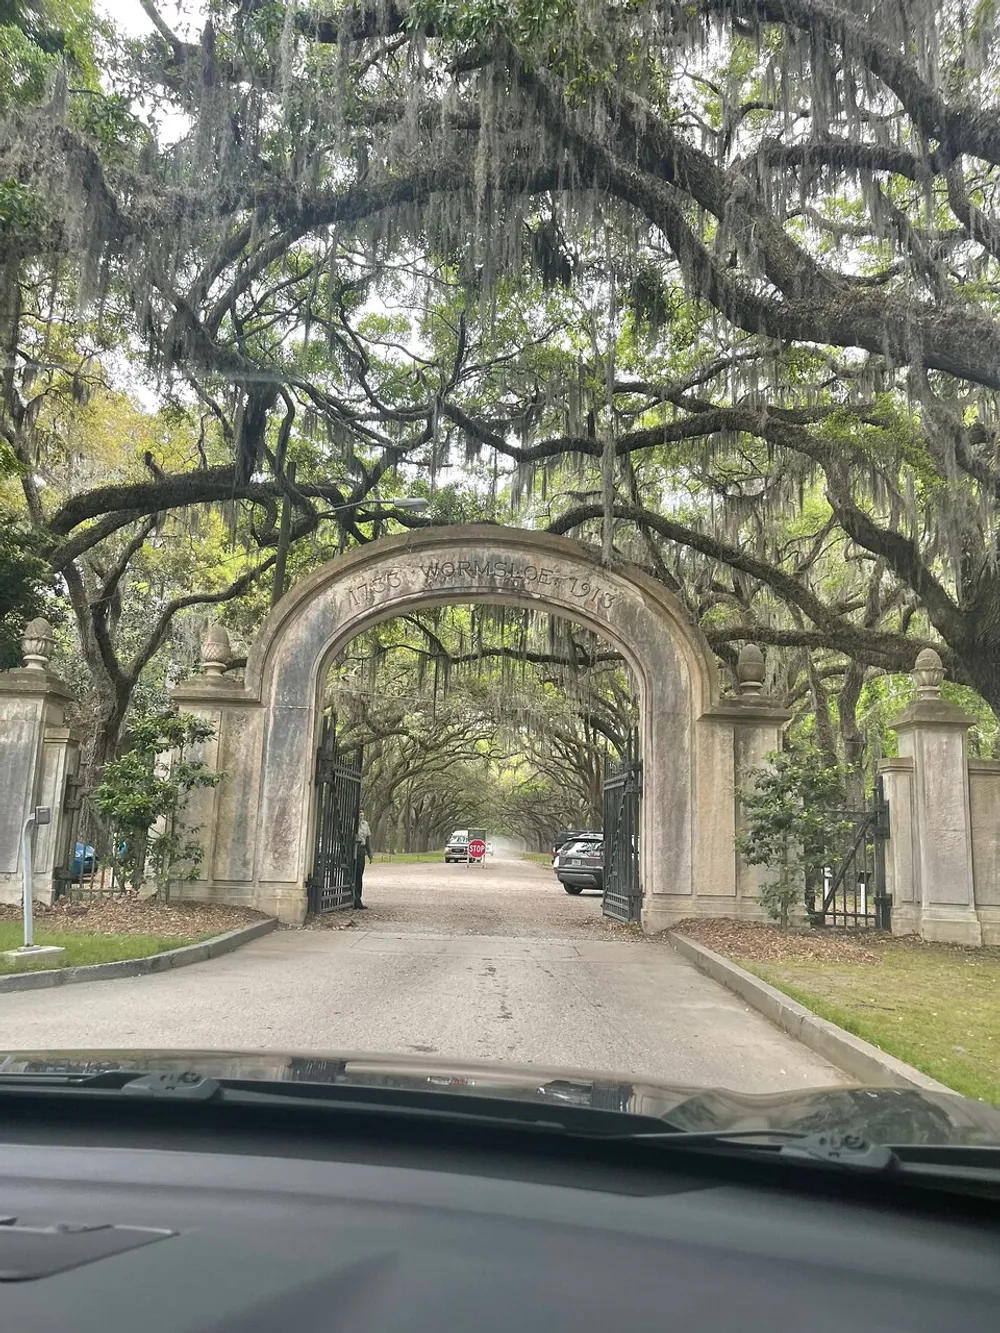 The image shows a view from a car approaching an ornate stone gateway labeled Wormsloe 1733 flanked by a canopy of trees draped with Spanish moss